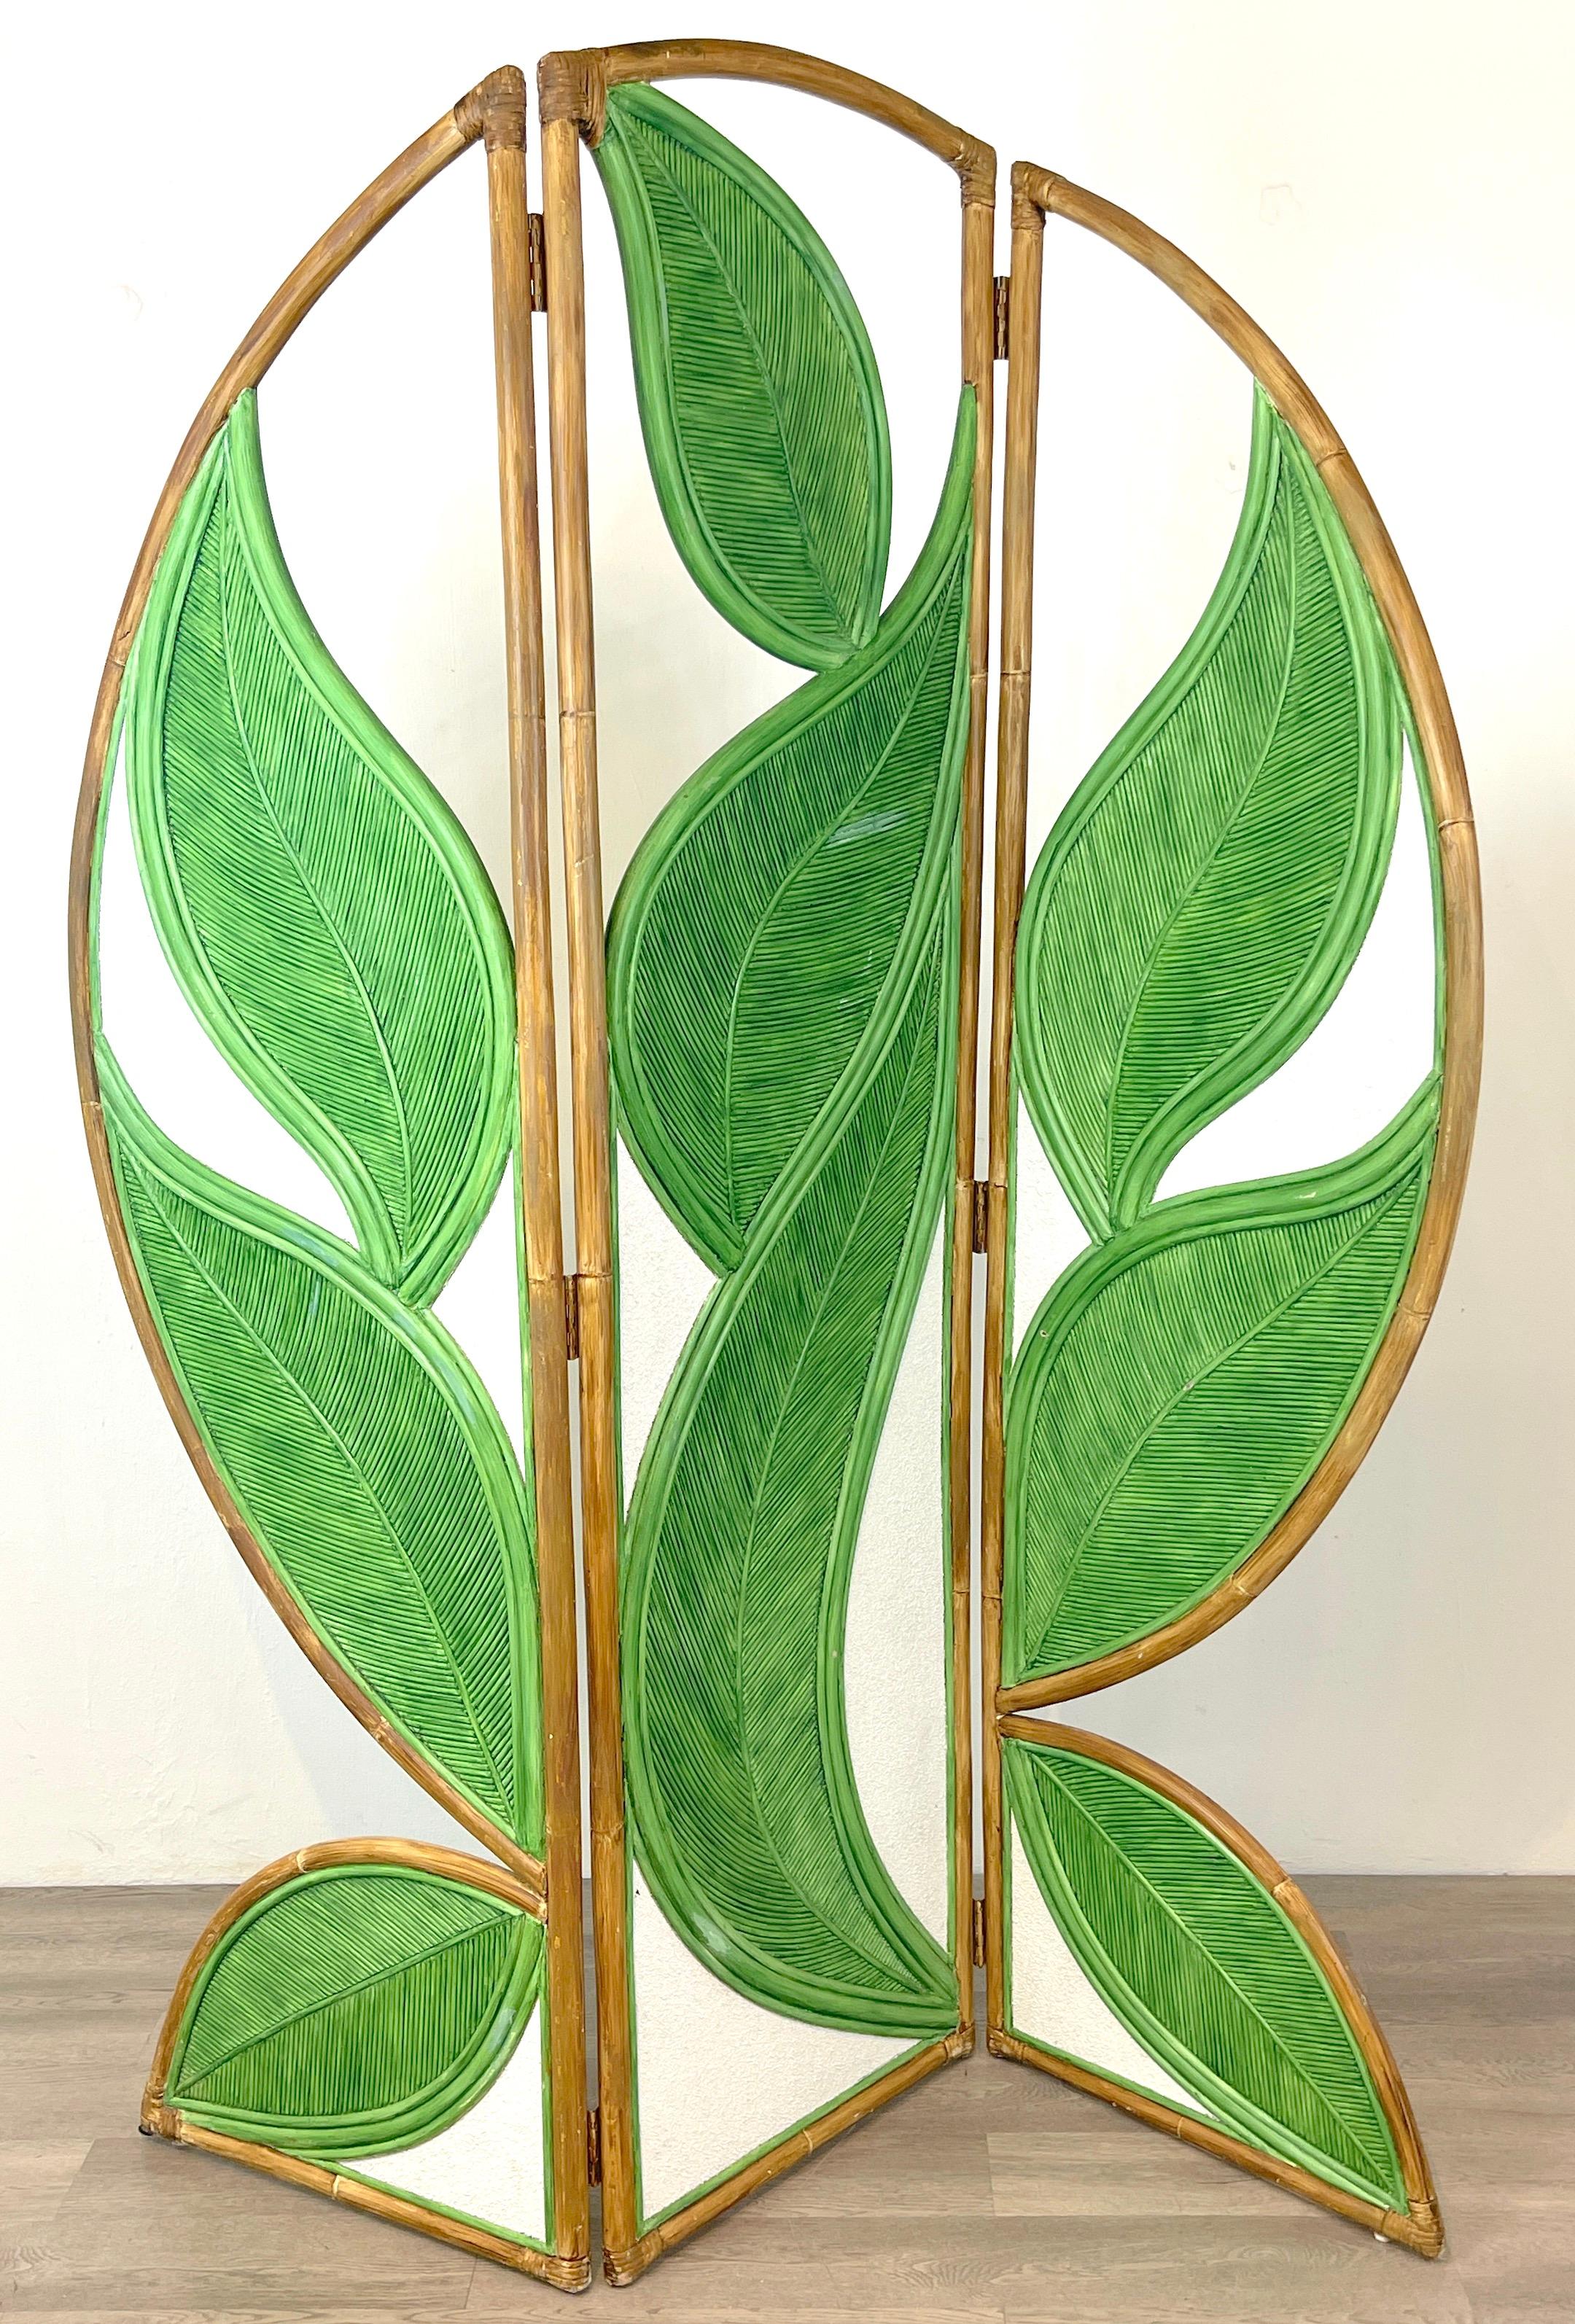 1970s organic modern polychromed three panel folding screen/room divider
Usa, Circa 1970s
A shapely 'roundel' example, fitted with three tapering panels each one with floating green leaves on a white background. 
The back of the screen mirrors